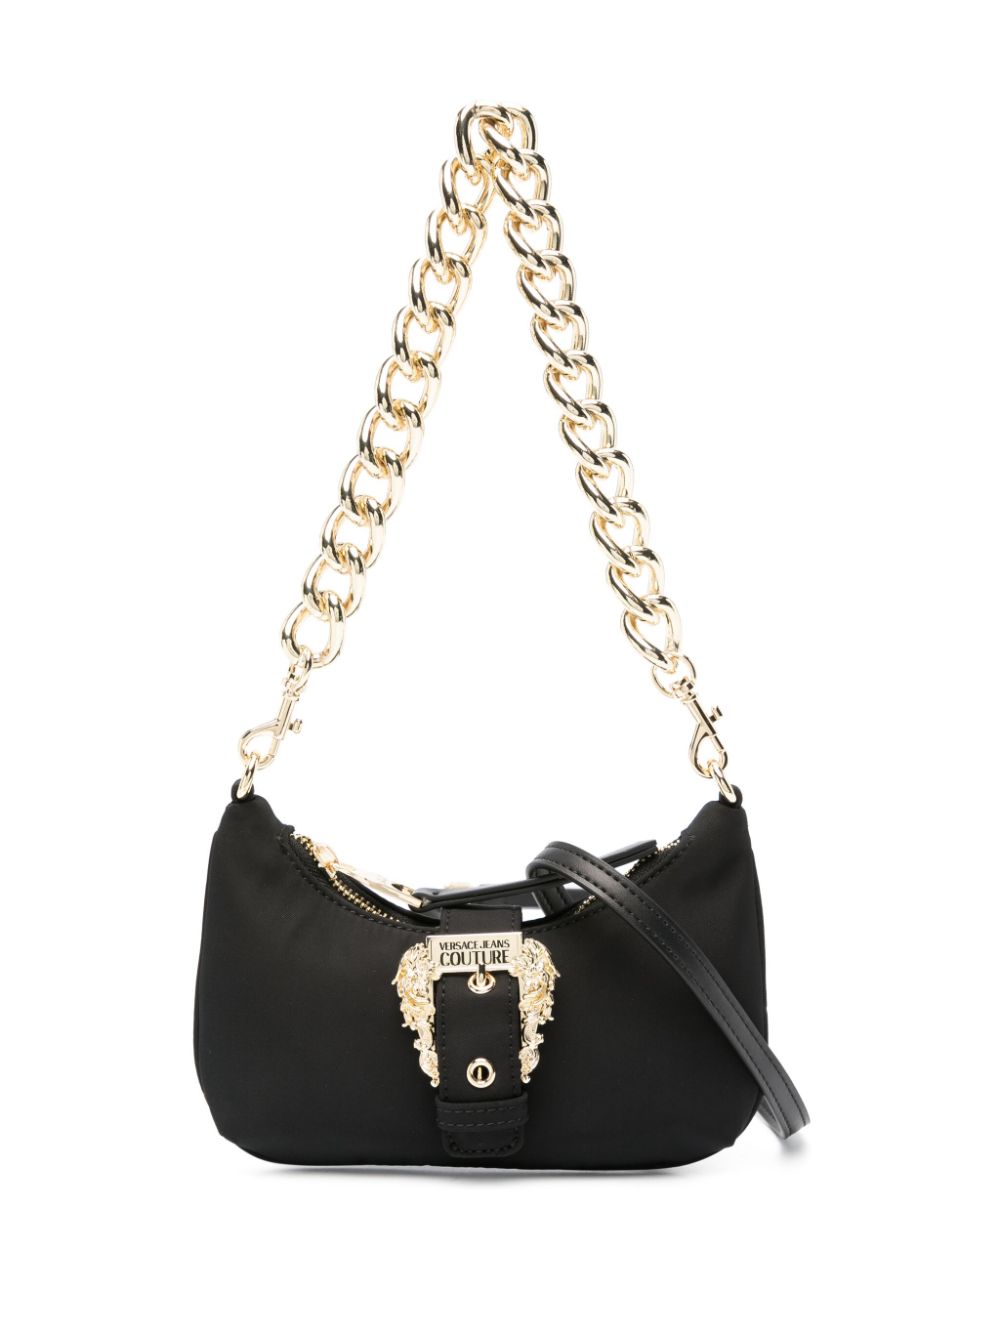 Versace Jeans Couture Couture cross body bag - Black von Versace Jeans Couture